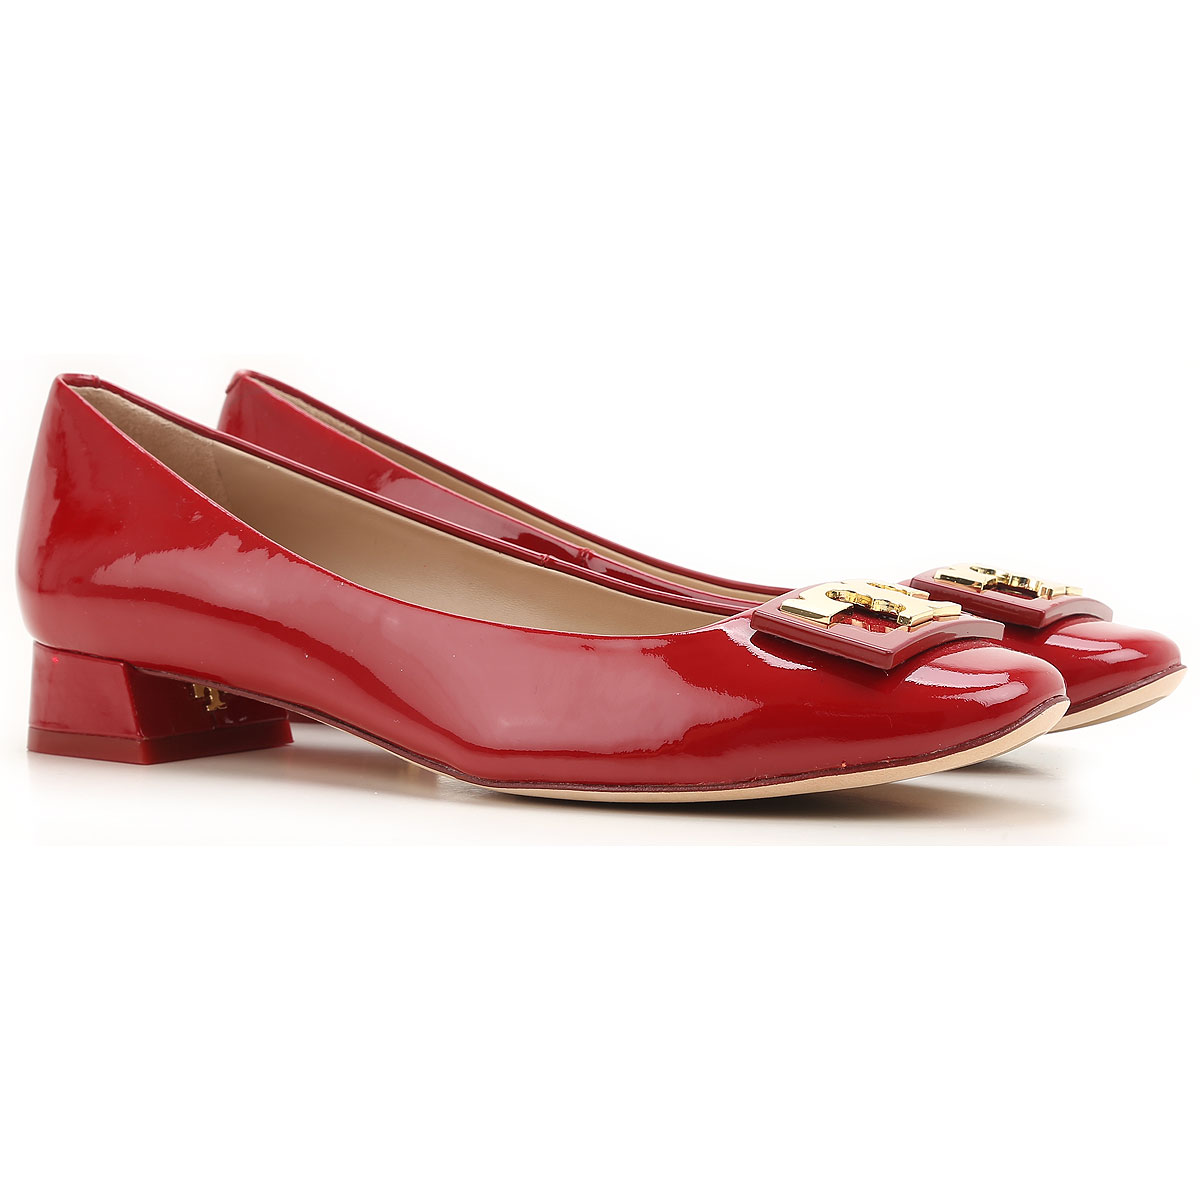 Womens Shoes Tory Burch, Style code: 31435-610-red